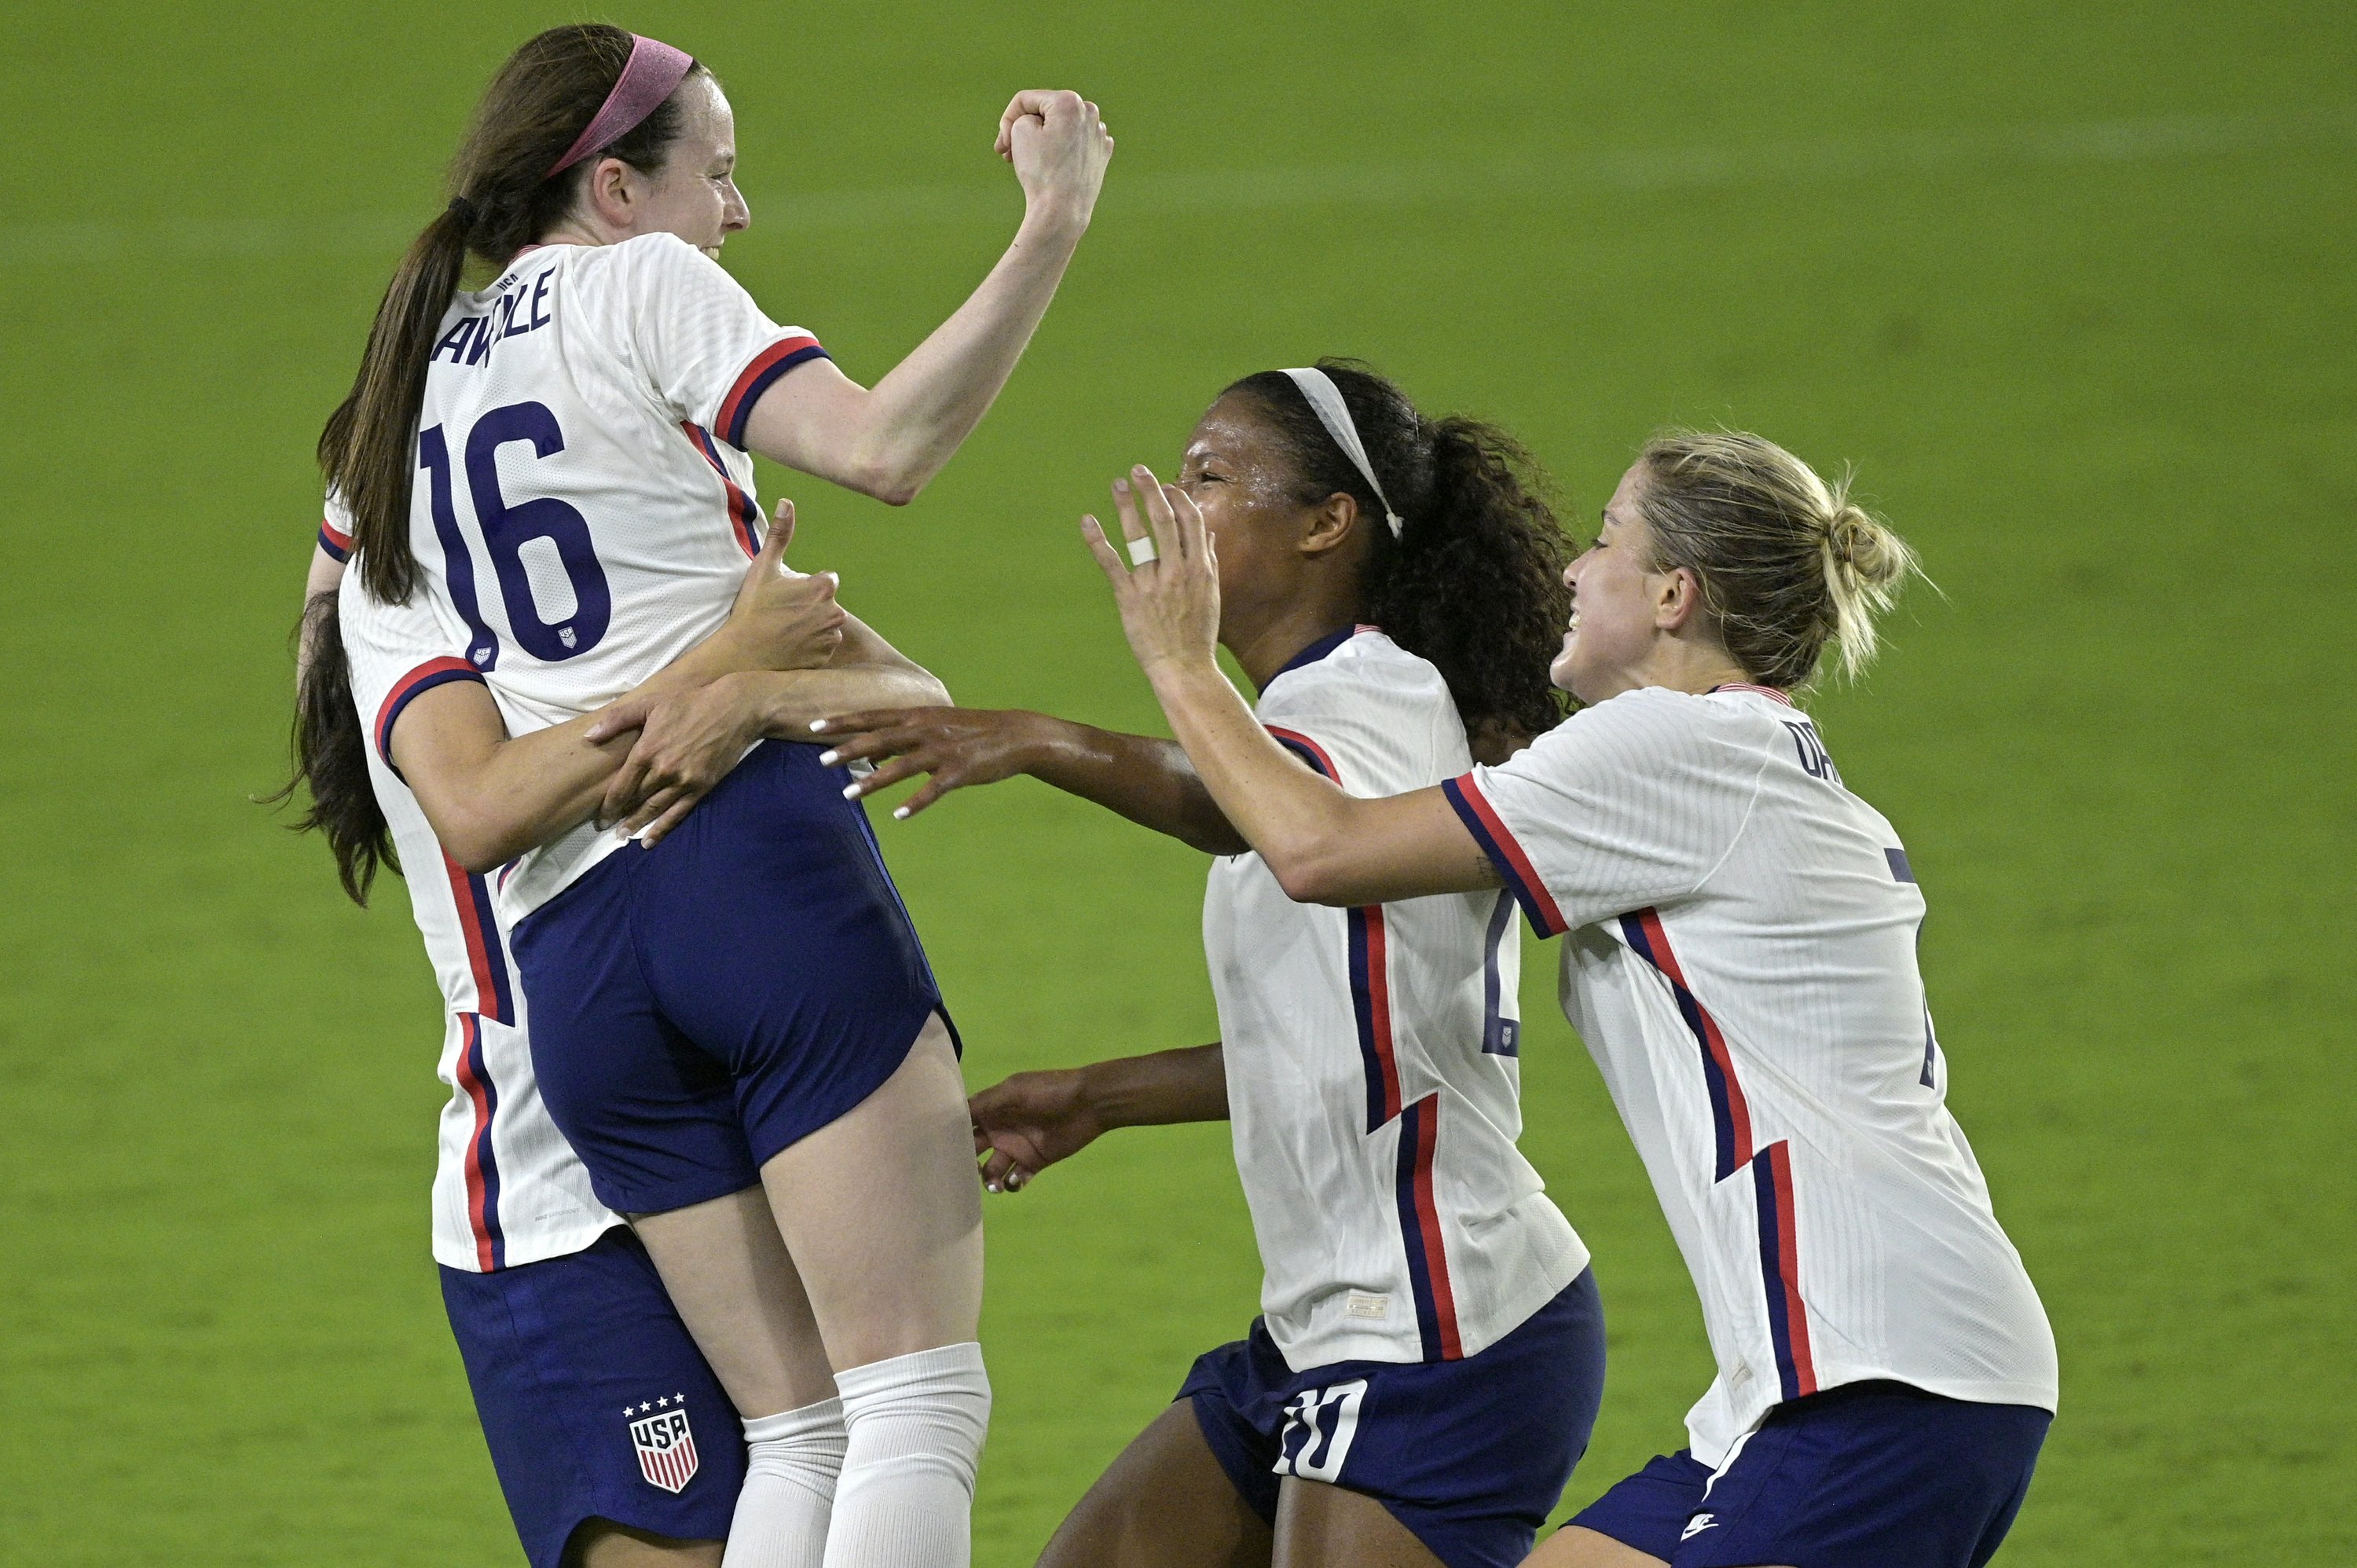 (AP) — Rose Lavelle scored in the 79th minute to give the United States a